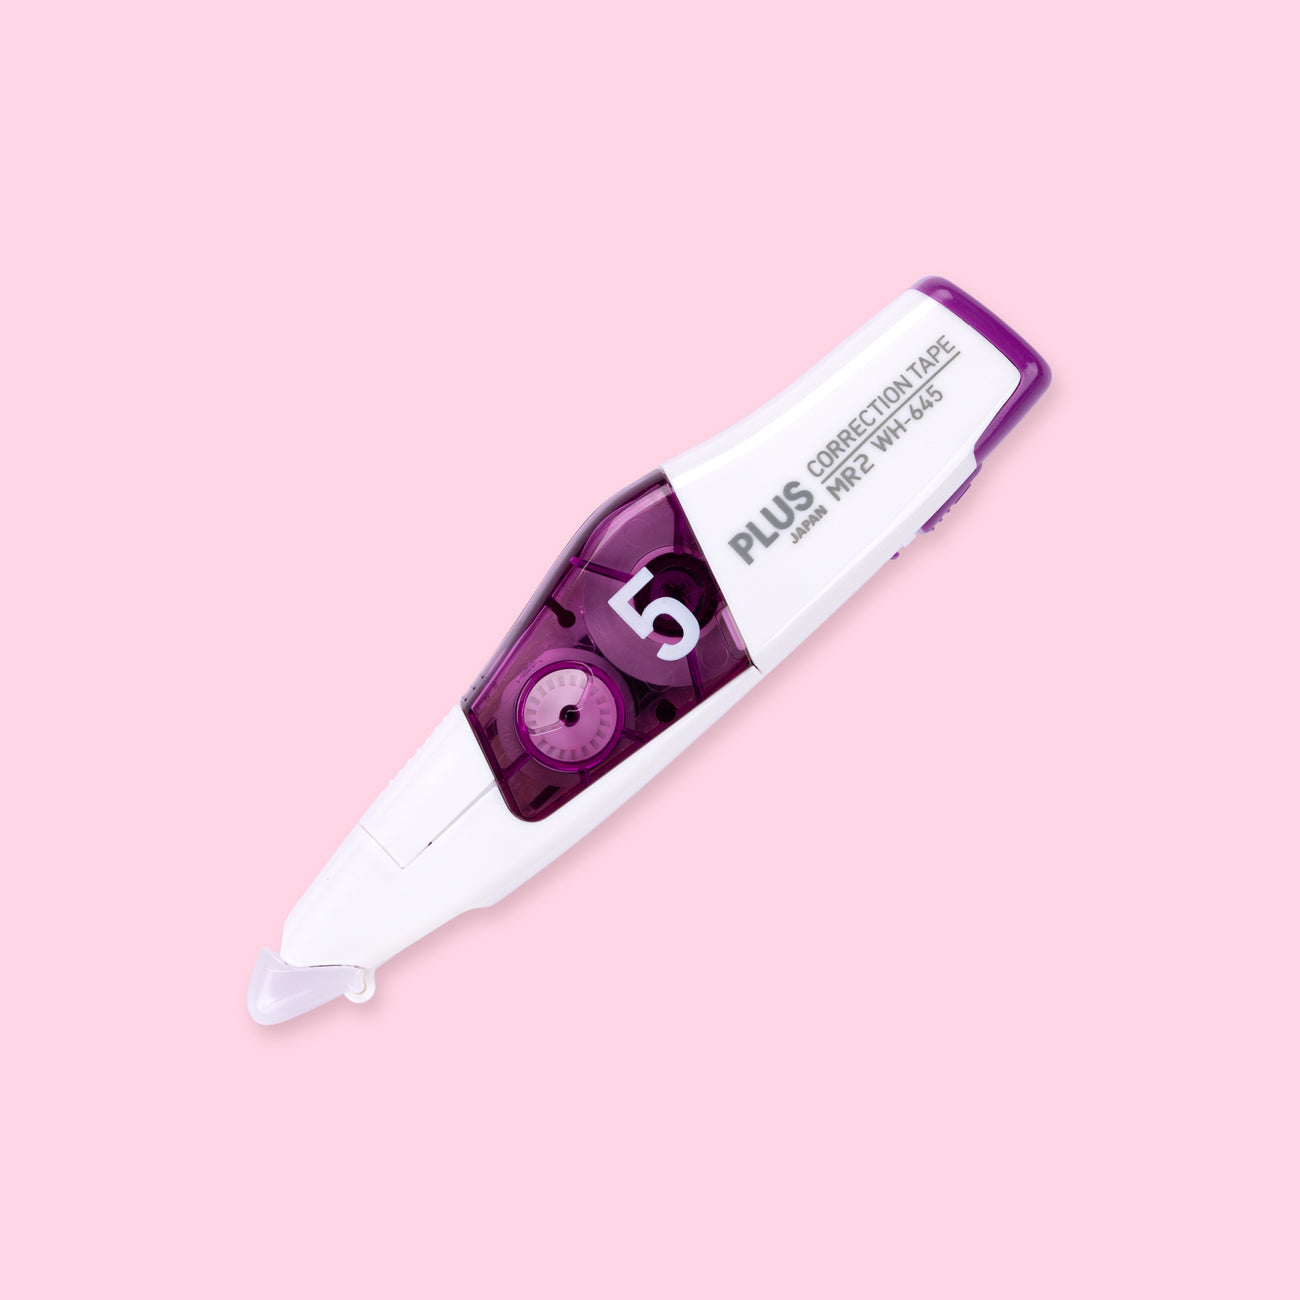 Plus Whiper MR2 Correction Tape Sweet Color Series - Purple